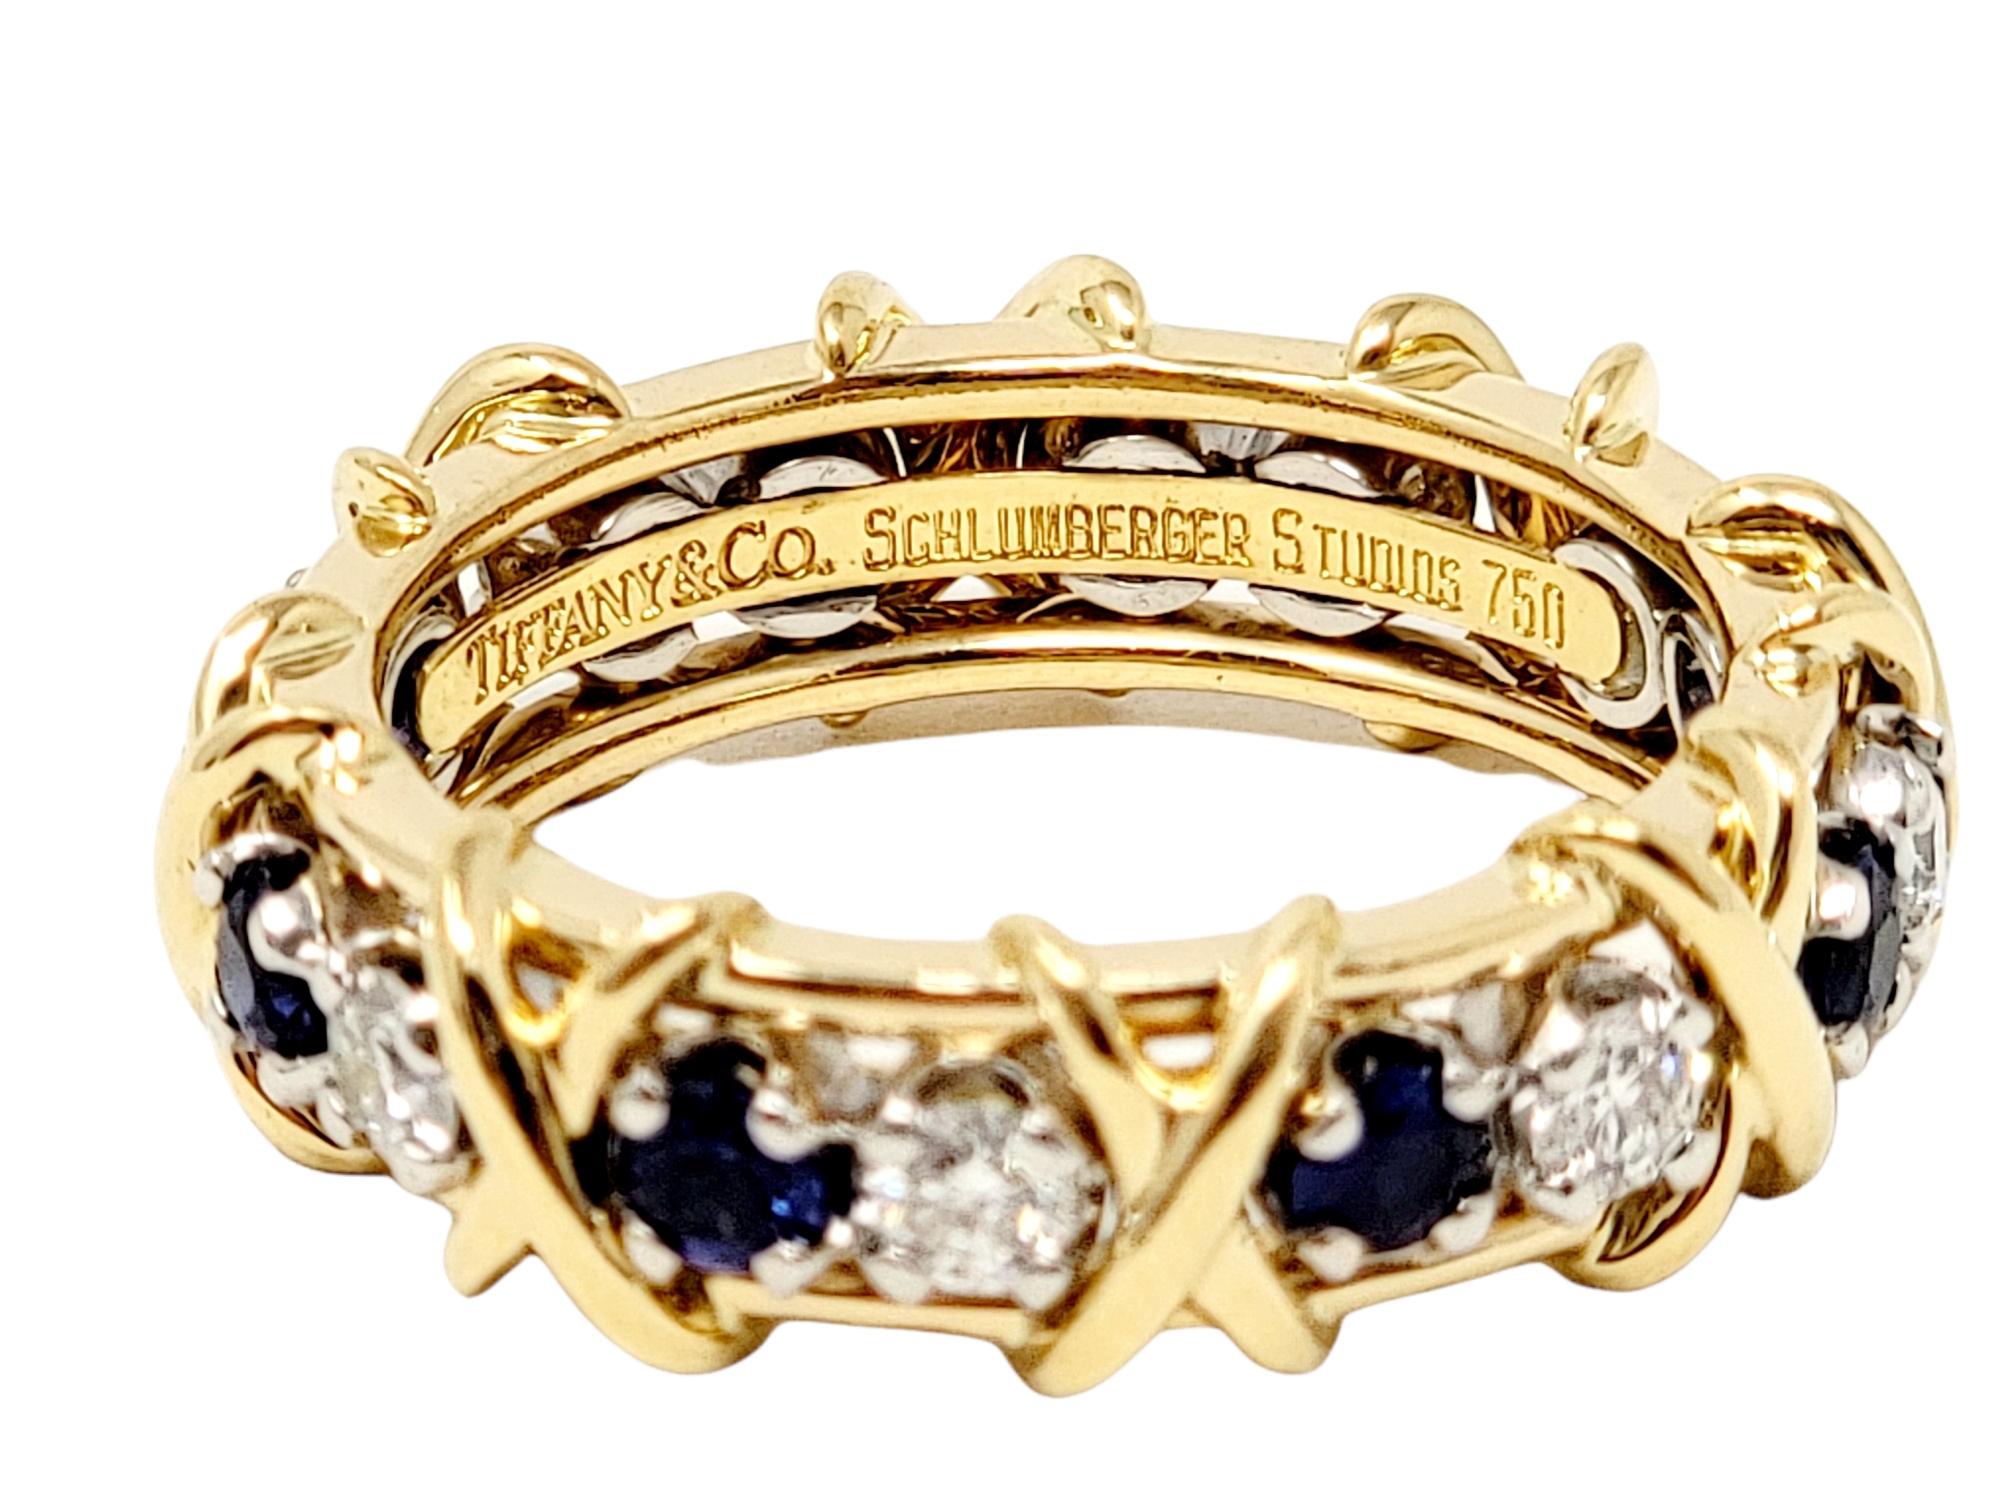 Jean Schlumberger for Tiffany & Co. Diamond and Sapphire Sixteen-Stone 3